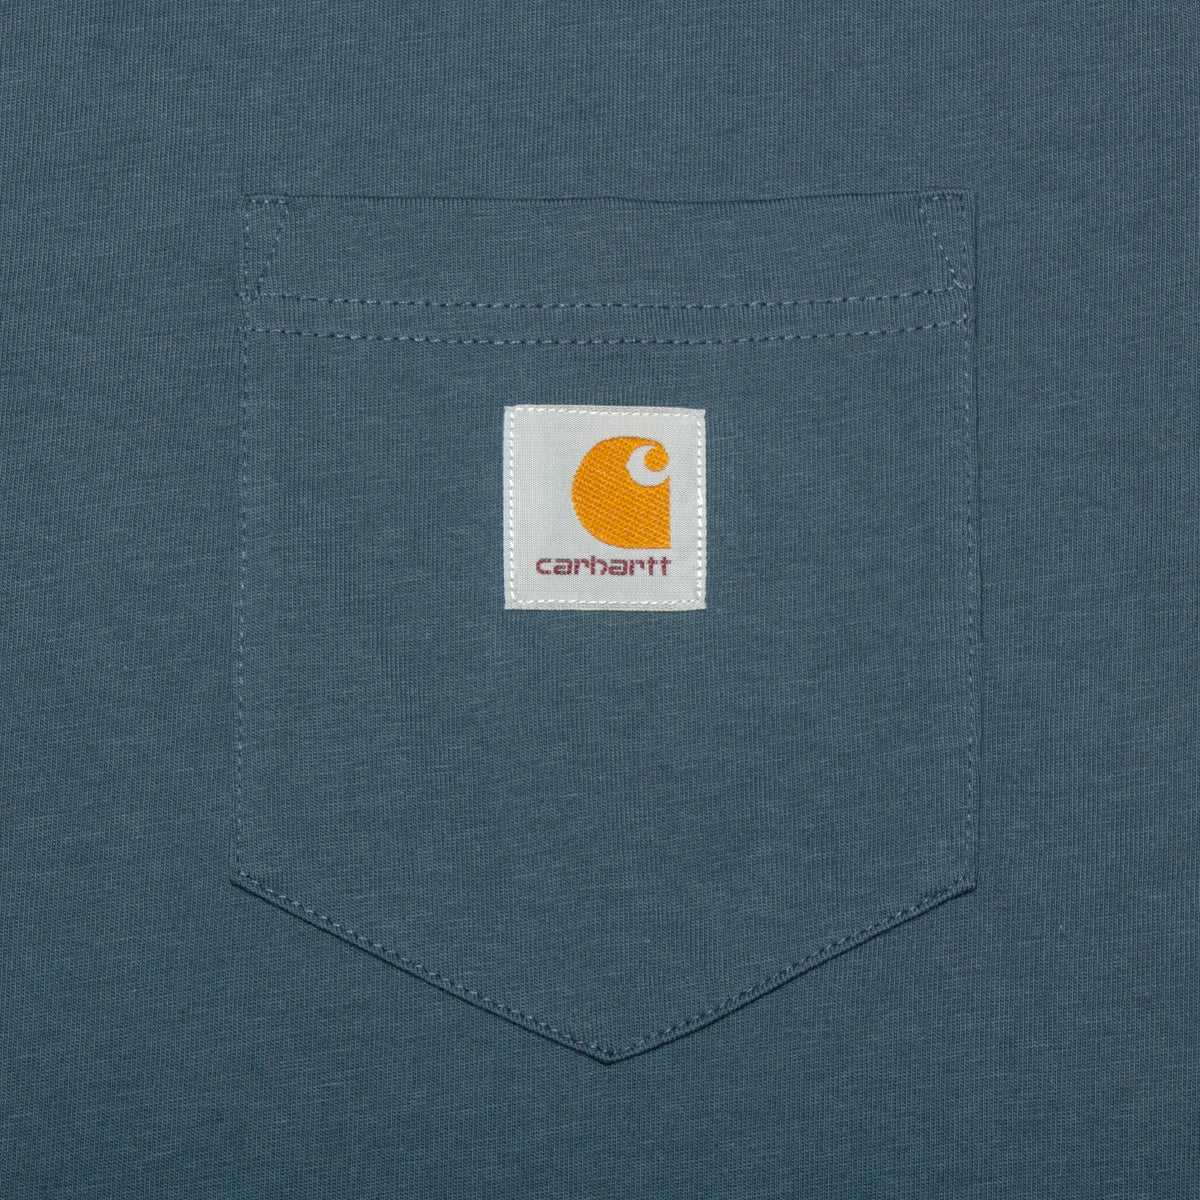 Carhartt WIP L/S Pocket T-Shirt Style # : I030437-0R Color : Ore